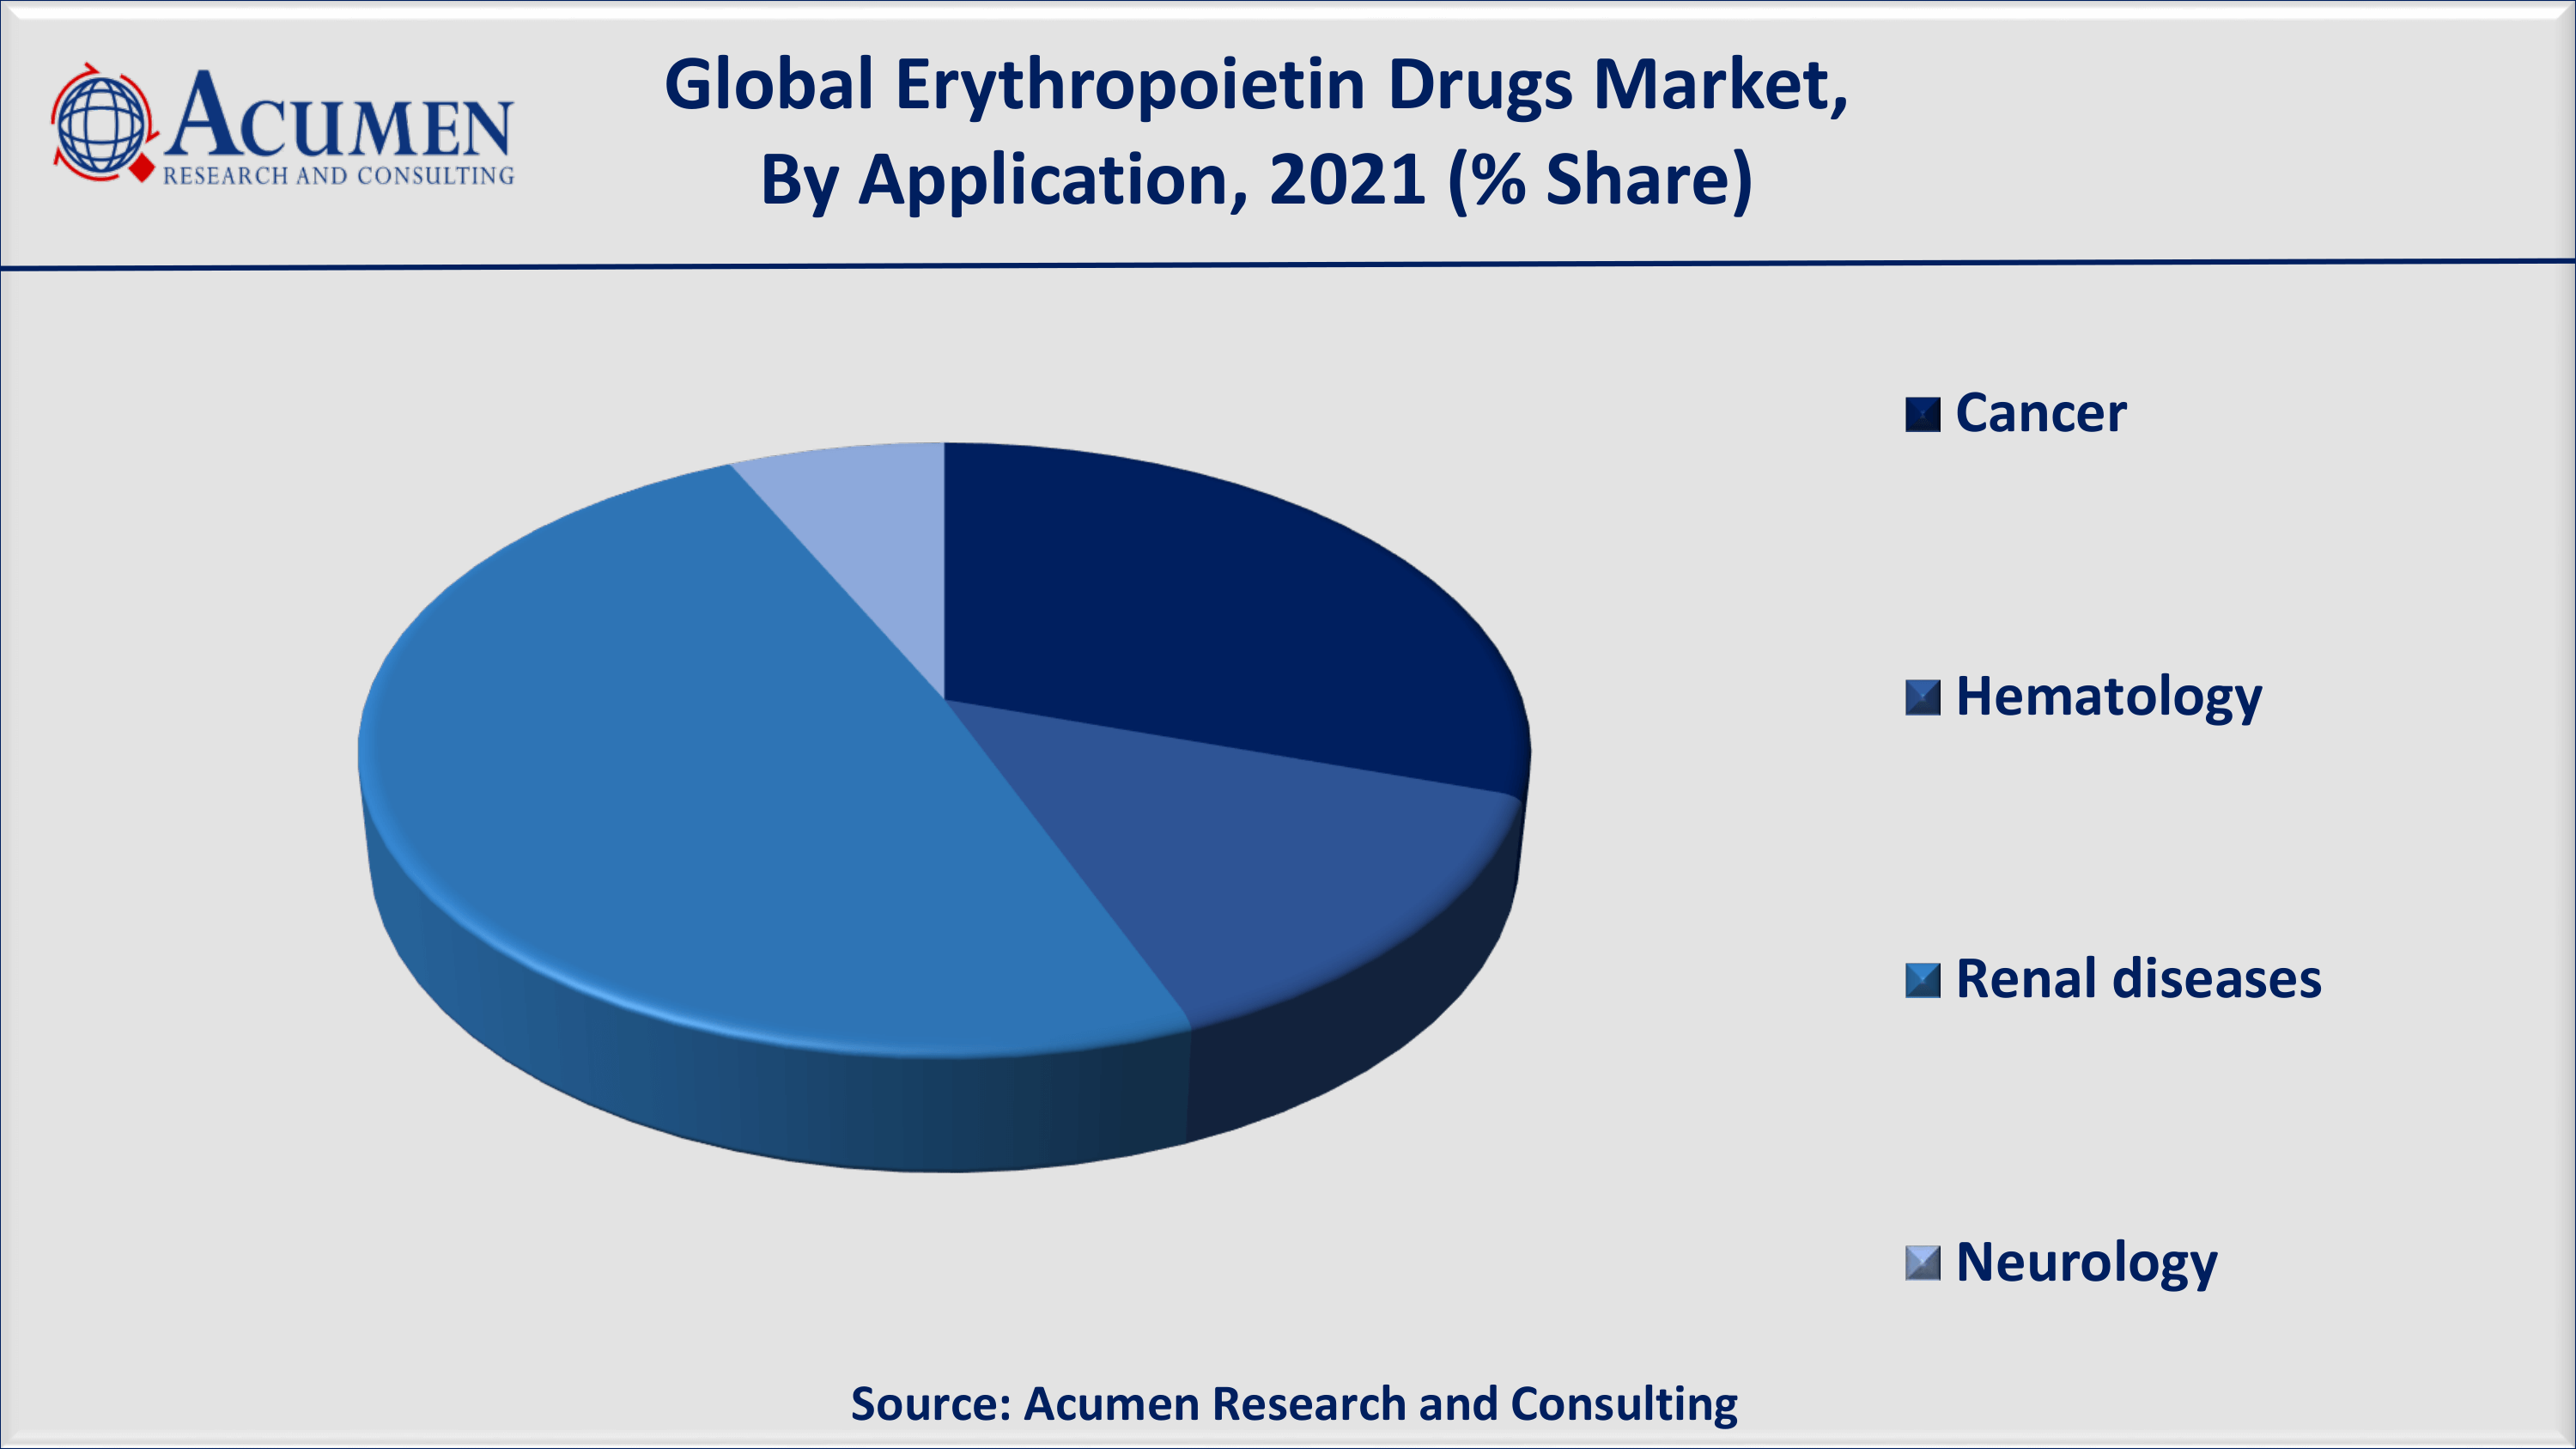 Based on application, renal disease accounted for over 50% of the overall market share in 2021